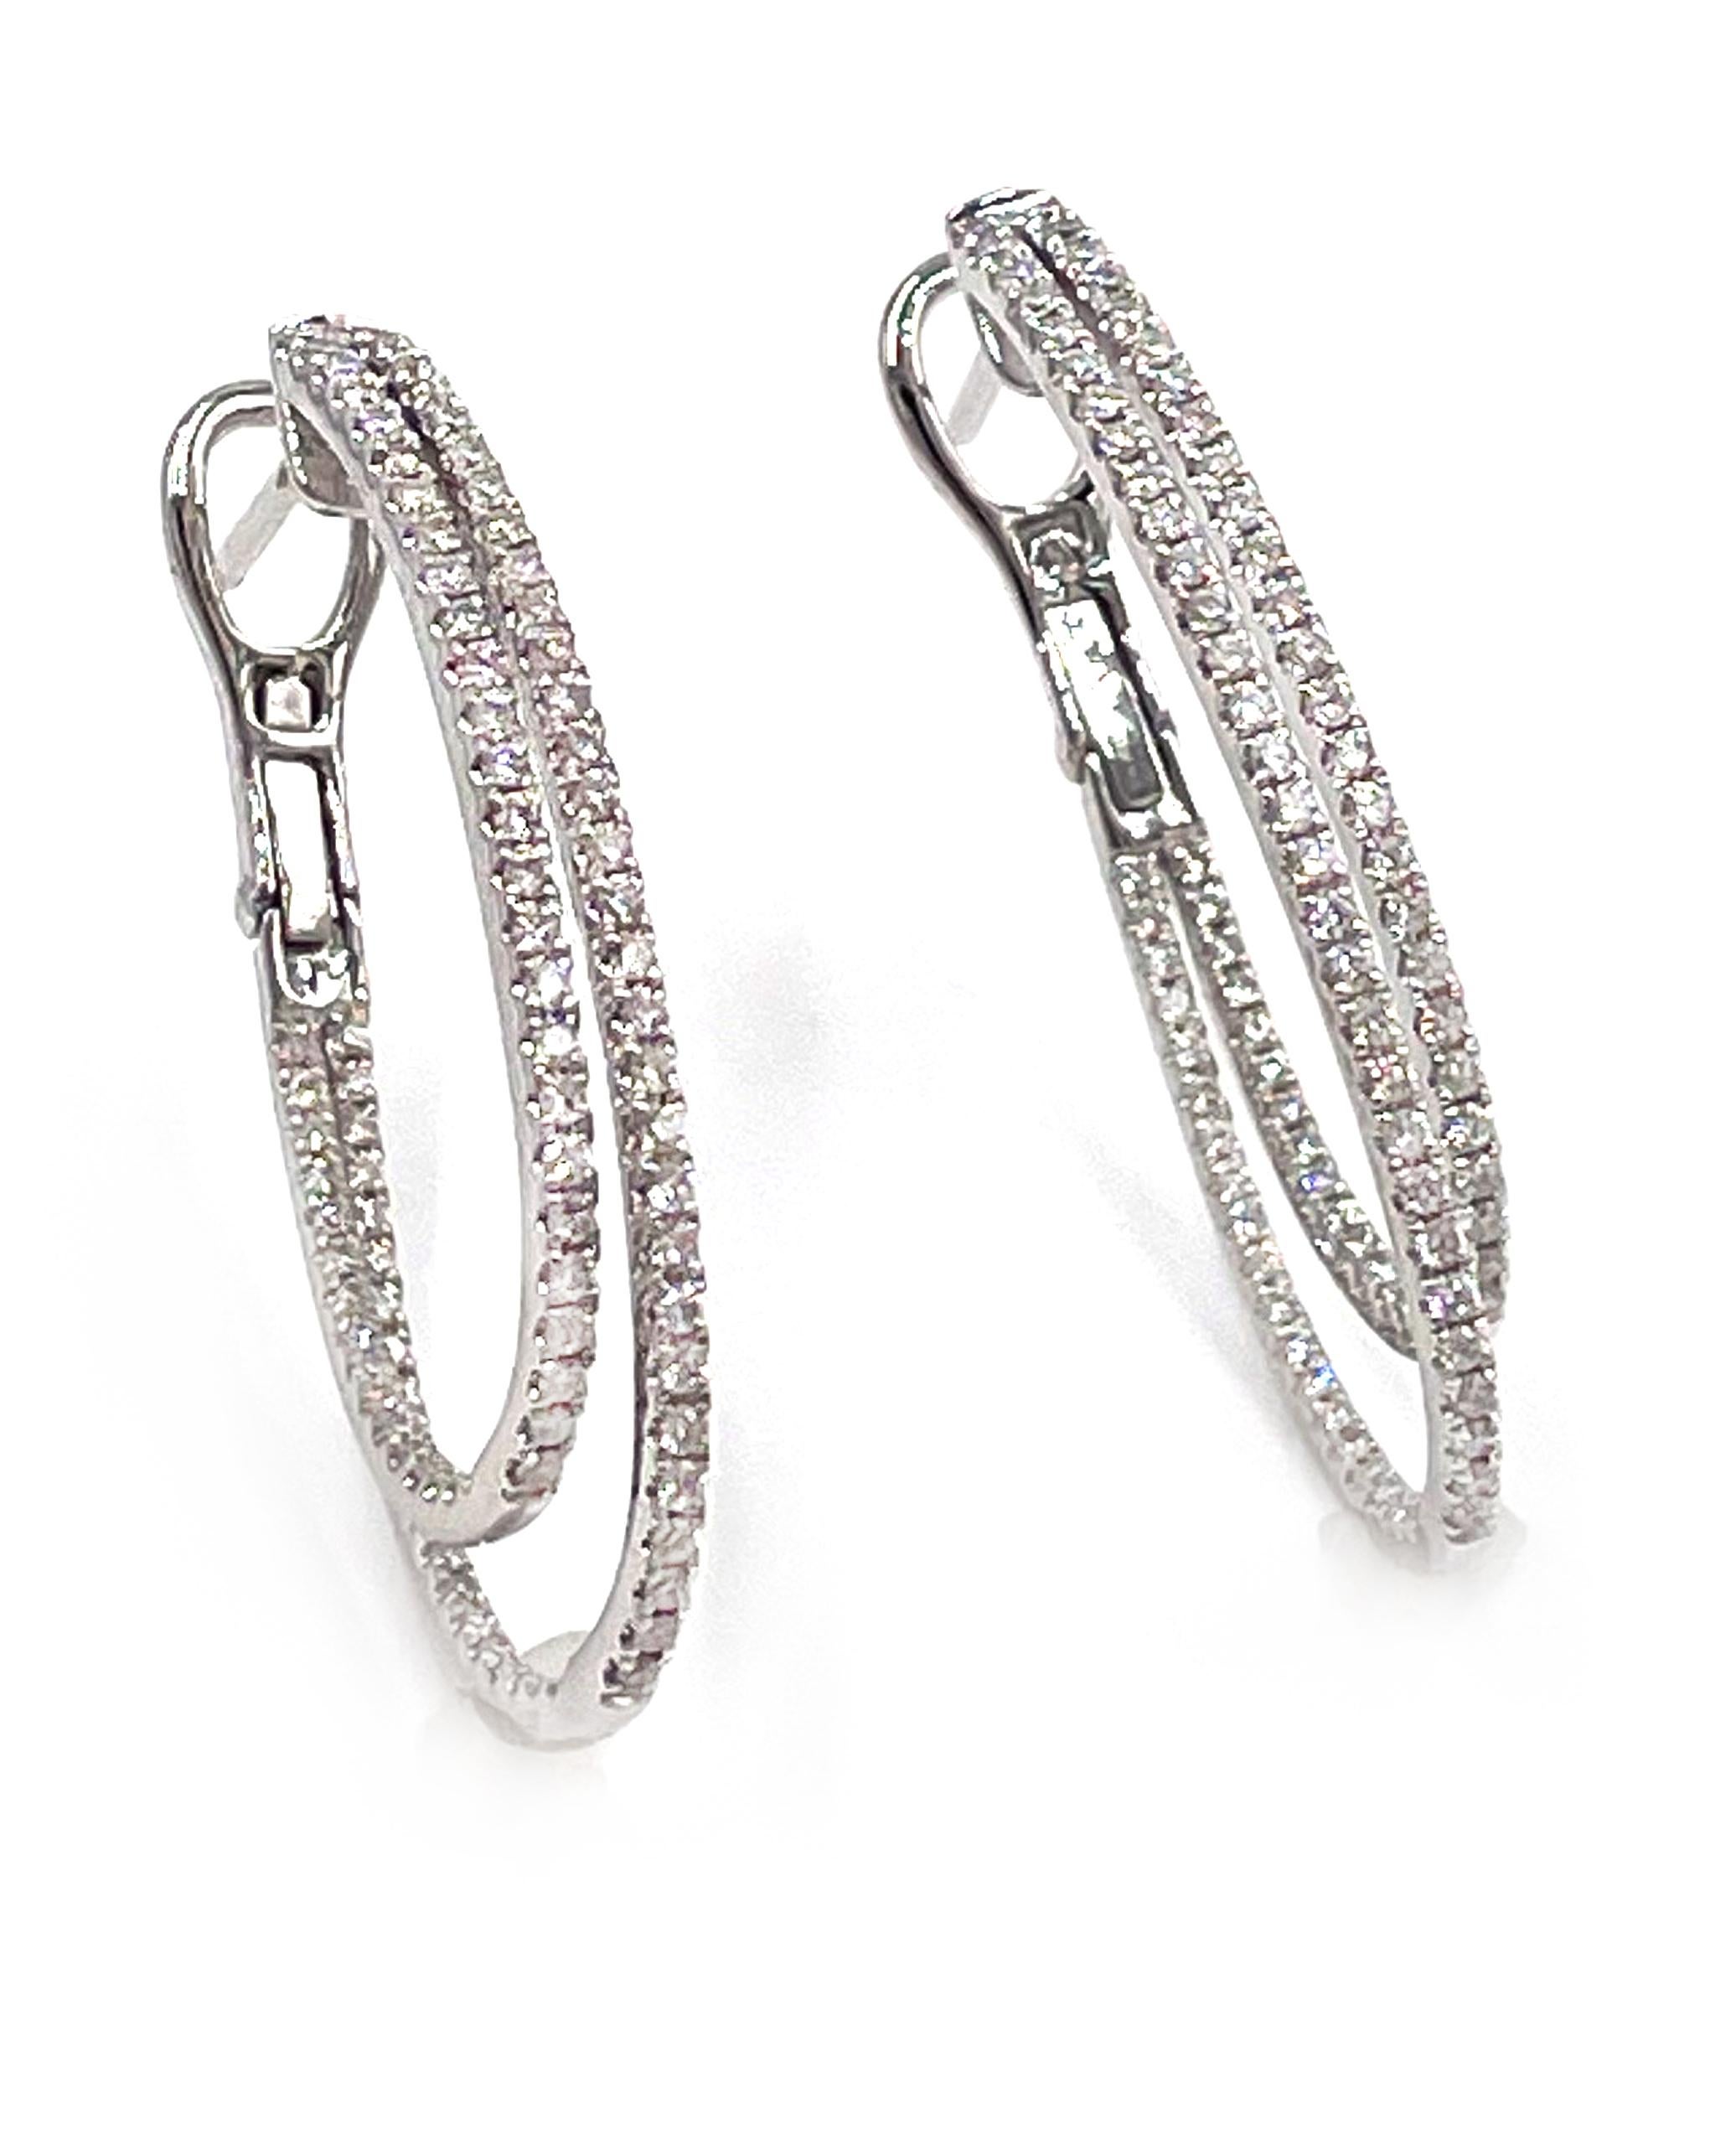 14K white gold double row hoop earrings with French backings.  The earrings are prong set with round, brilliant-cut diamonds weighing 0.95 carats total. 

- The diamonds are on average G/H color, VS2/SI1 clarity
- 1.25 inches in length
- 3.2mm in